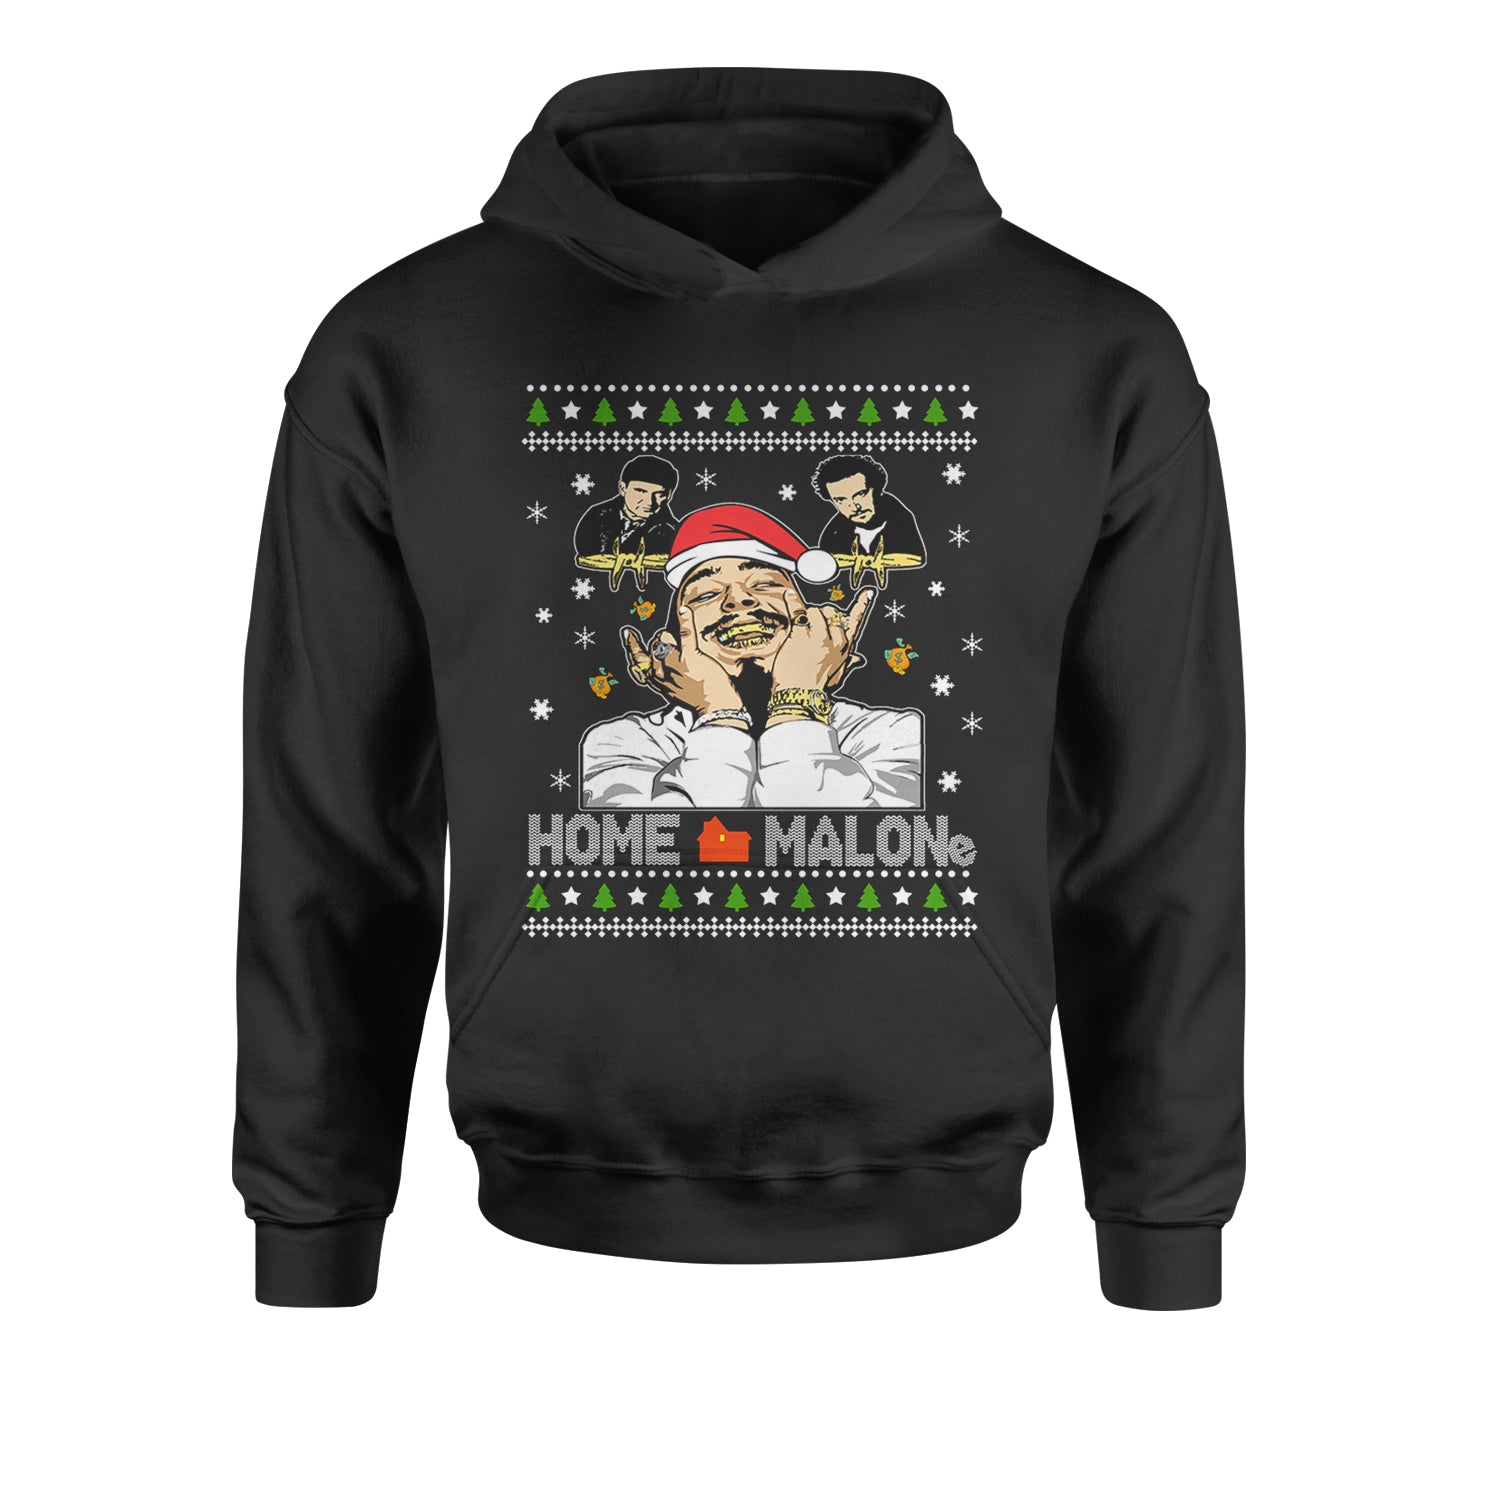 Home Malone Ugly Christmas Youth-Sized Hoodie alone, caulkin, home, malone, mcauley, post by Expression Tees